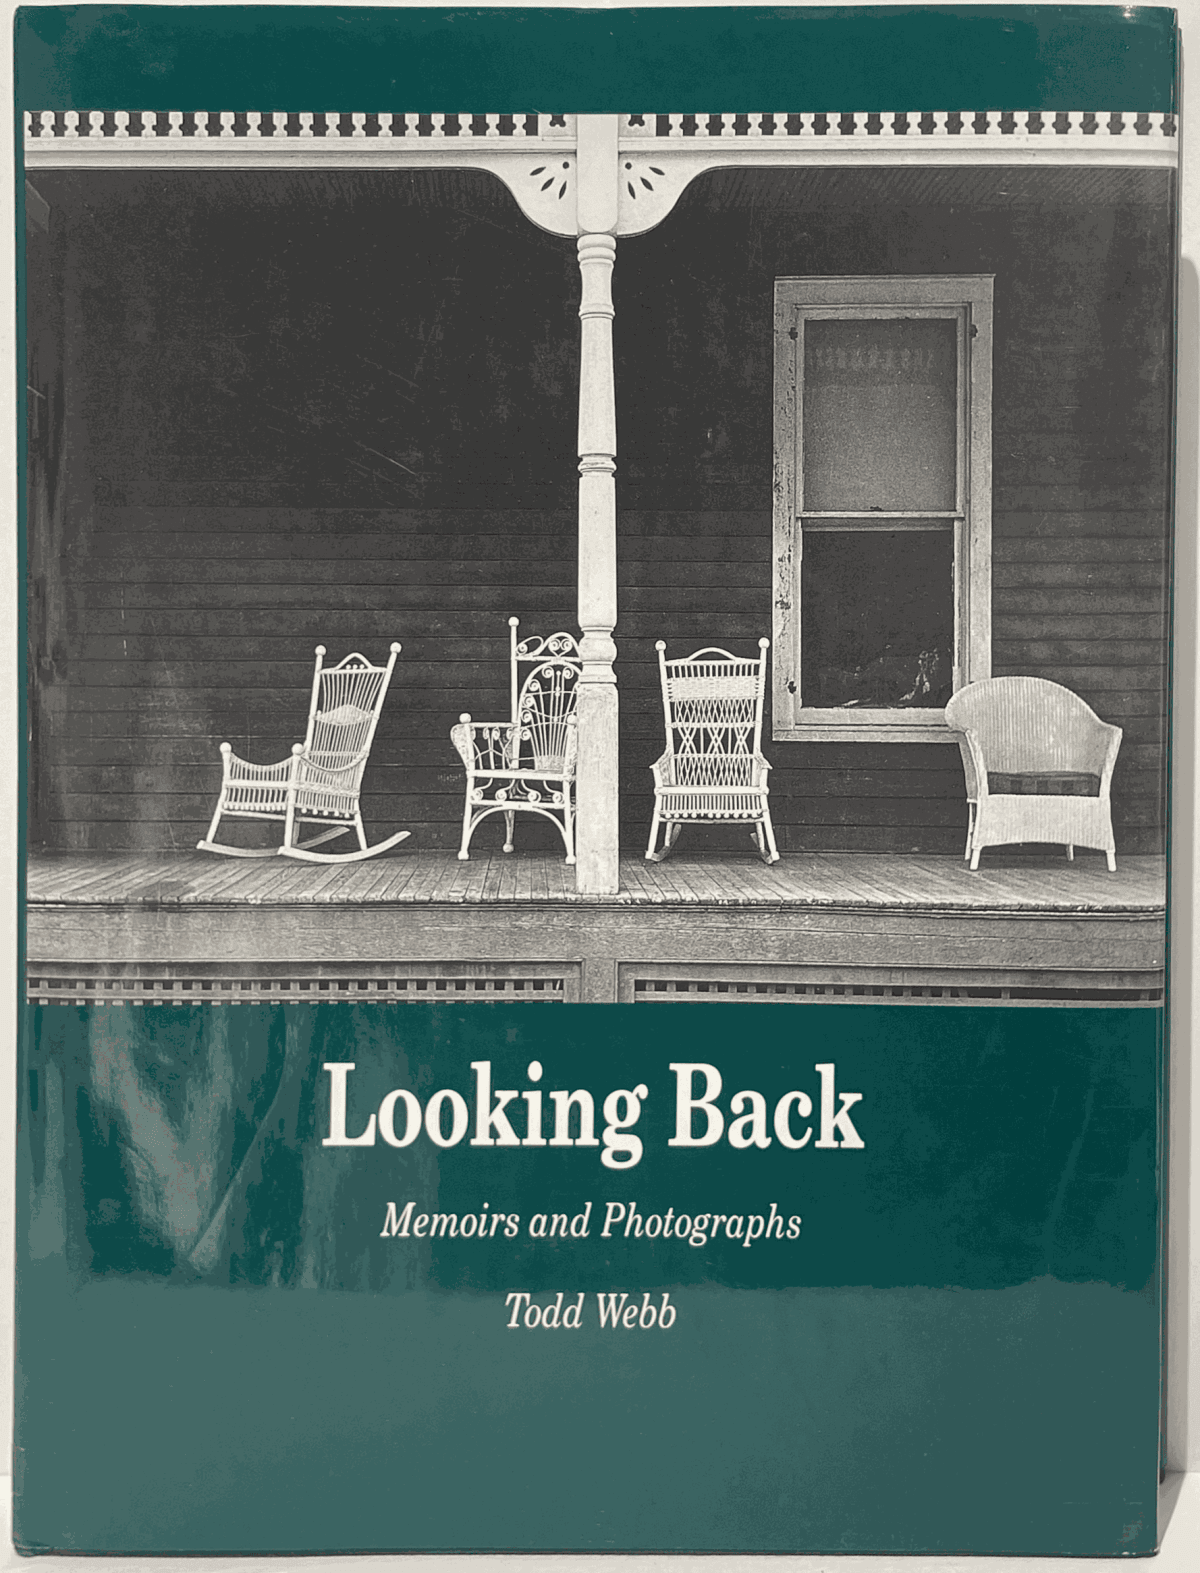 Looking Back: Memoirs and Photographs